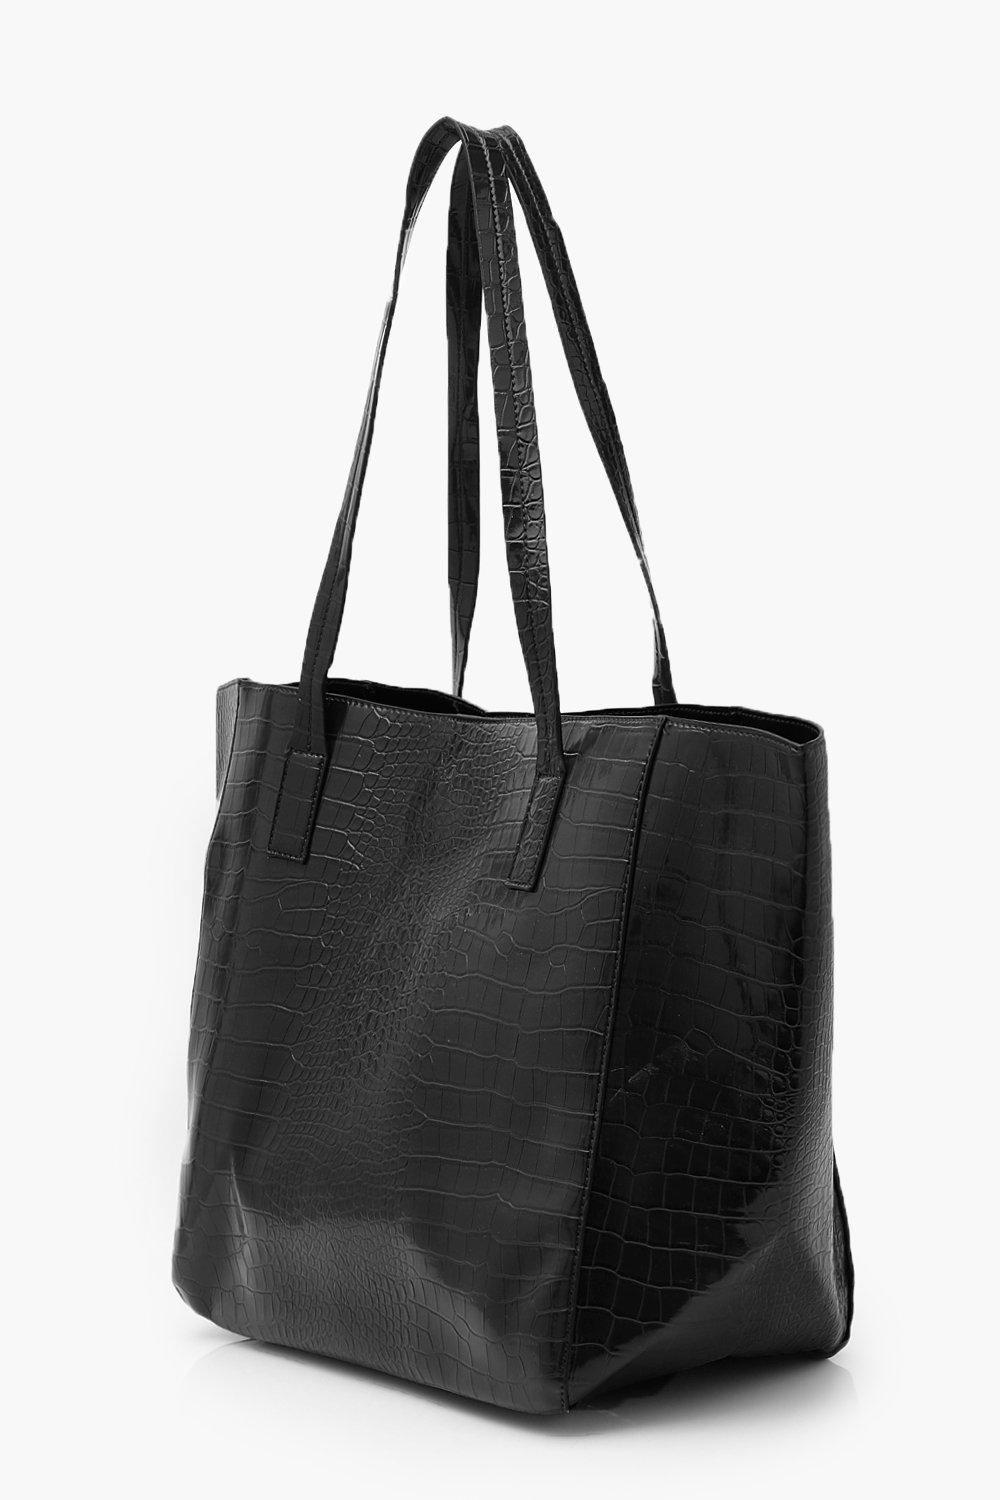 Womens Oversized Faux Leather Croc Tote Day Bag - Black One Size